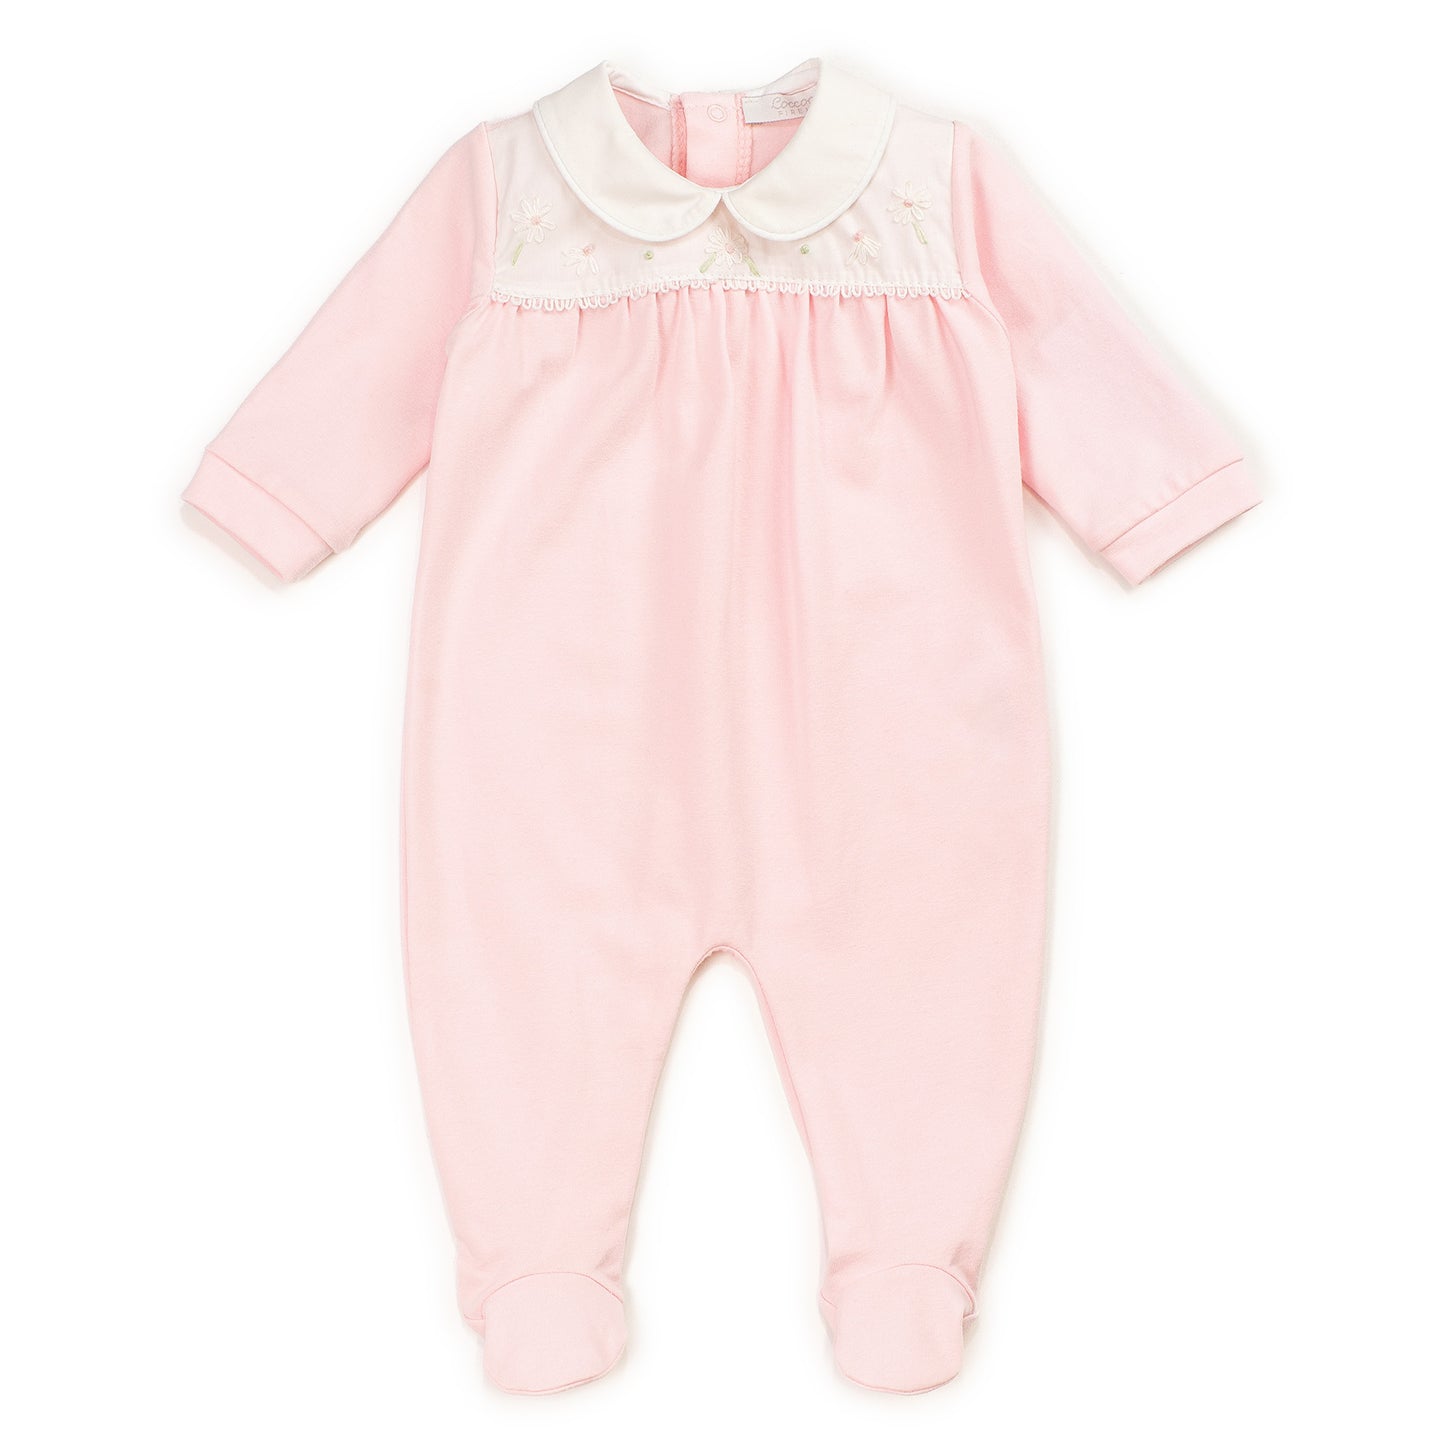 Pale pink baby grow with floral embroidery - Adora Childrenswear